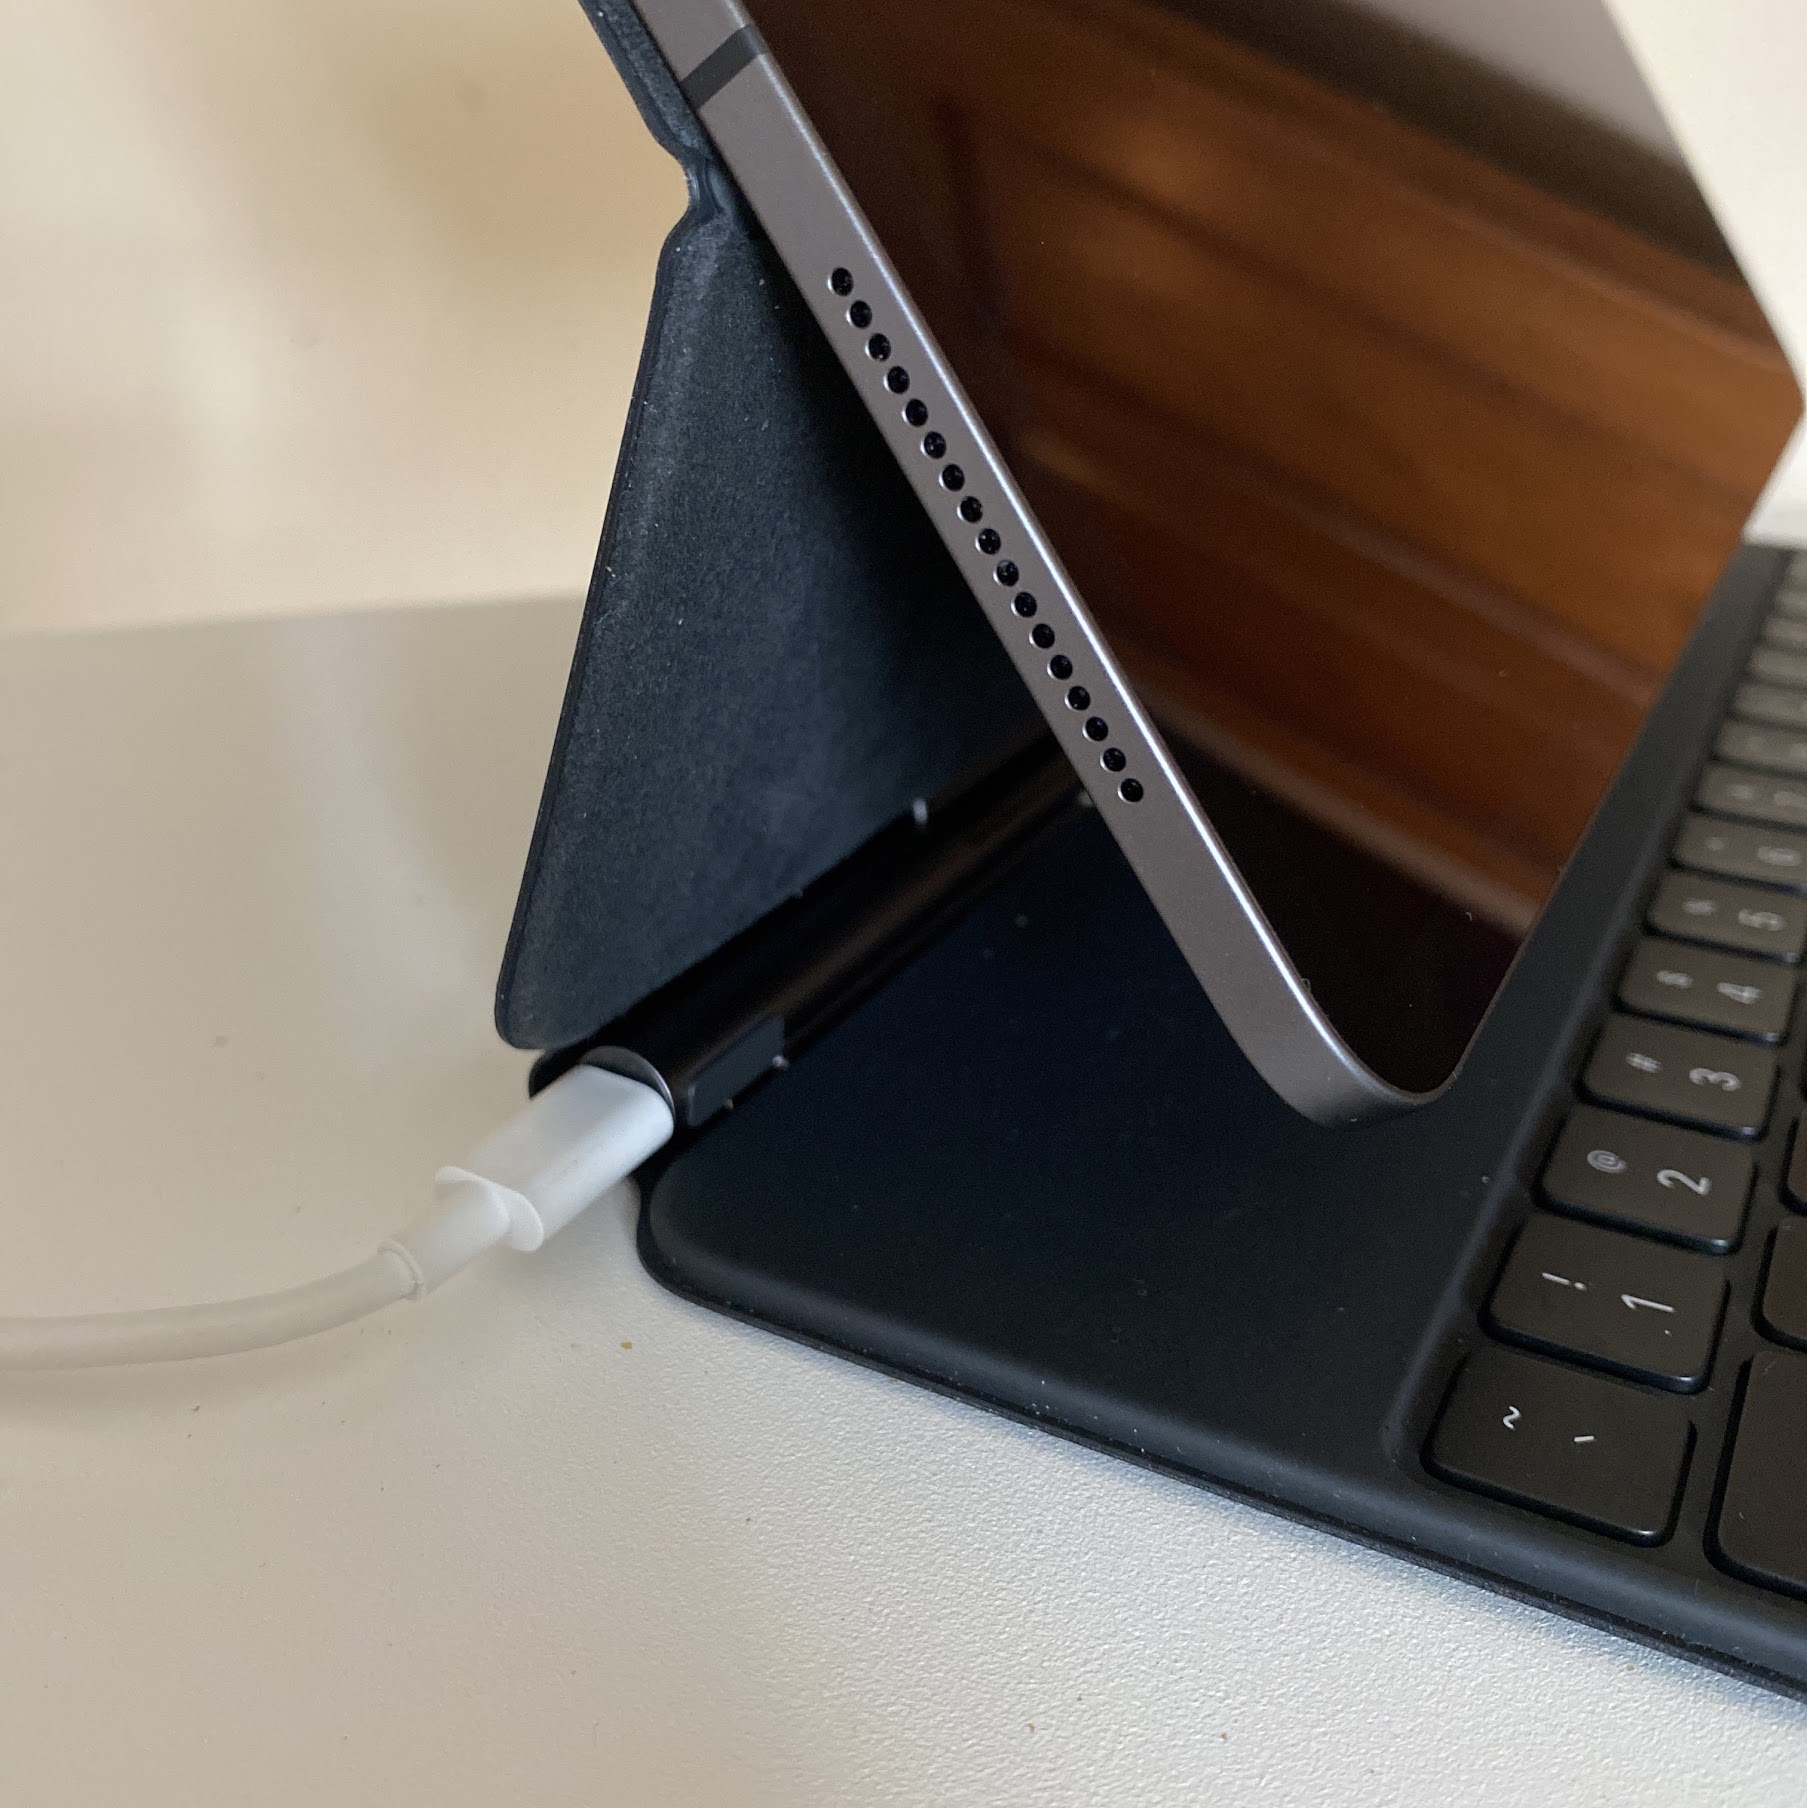 With the Trackpad-Equipped Magic Keyboard, You Can Use an iPad Pro